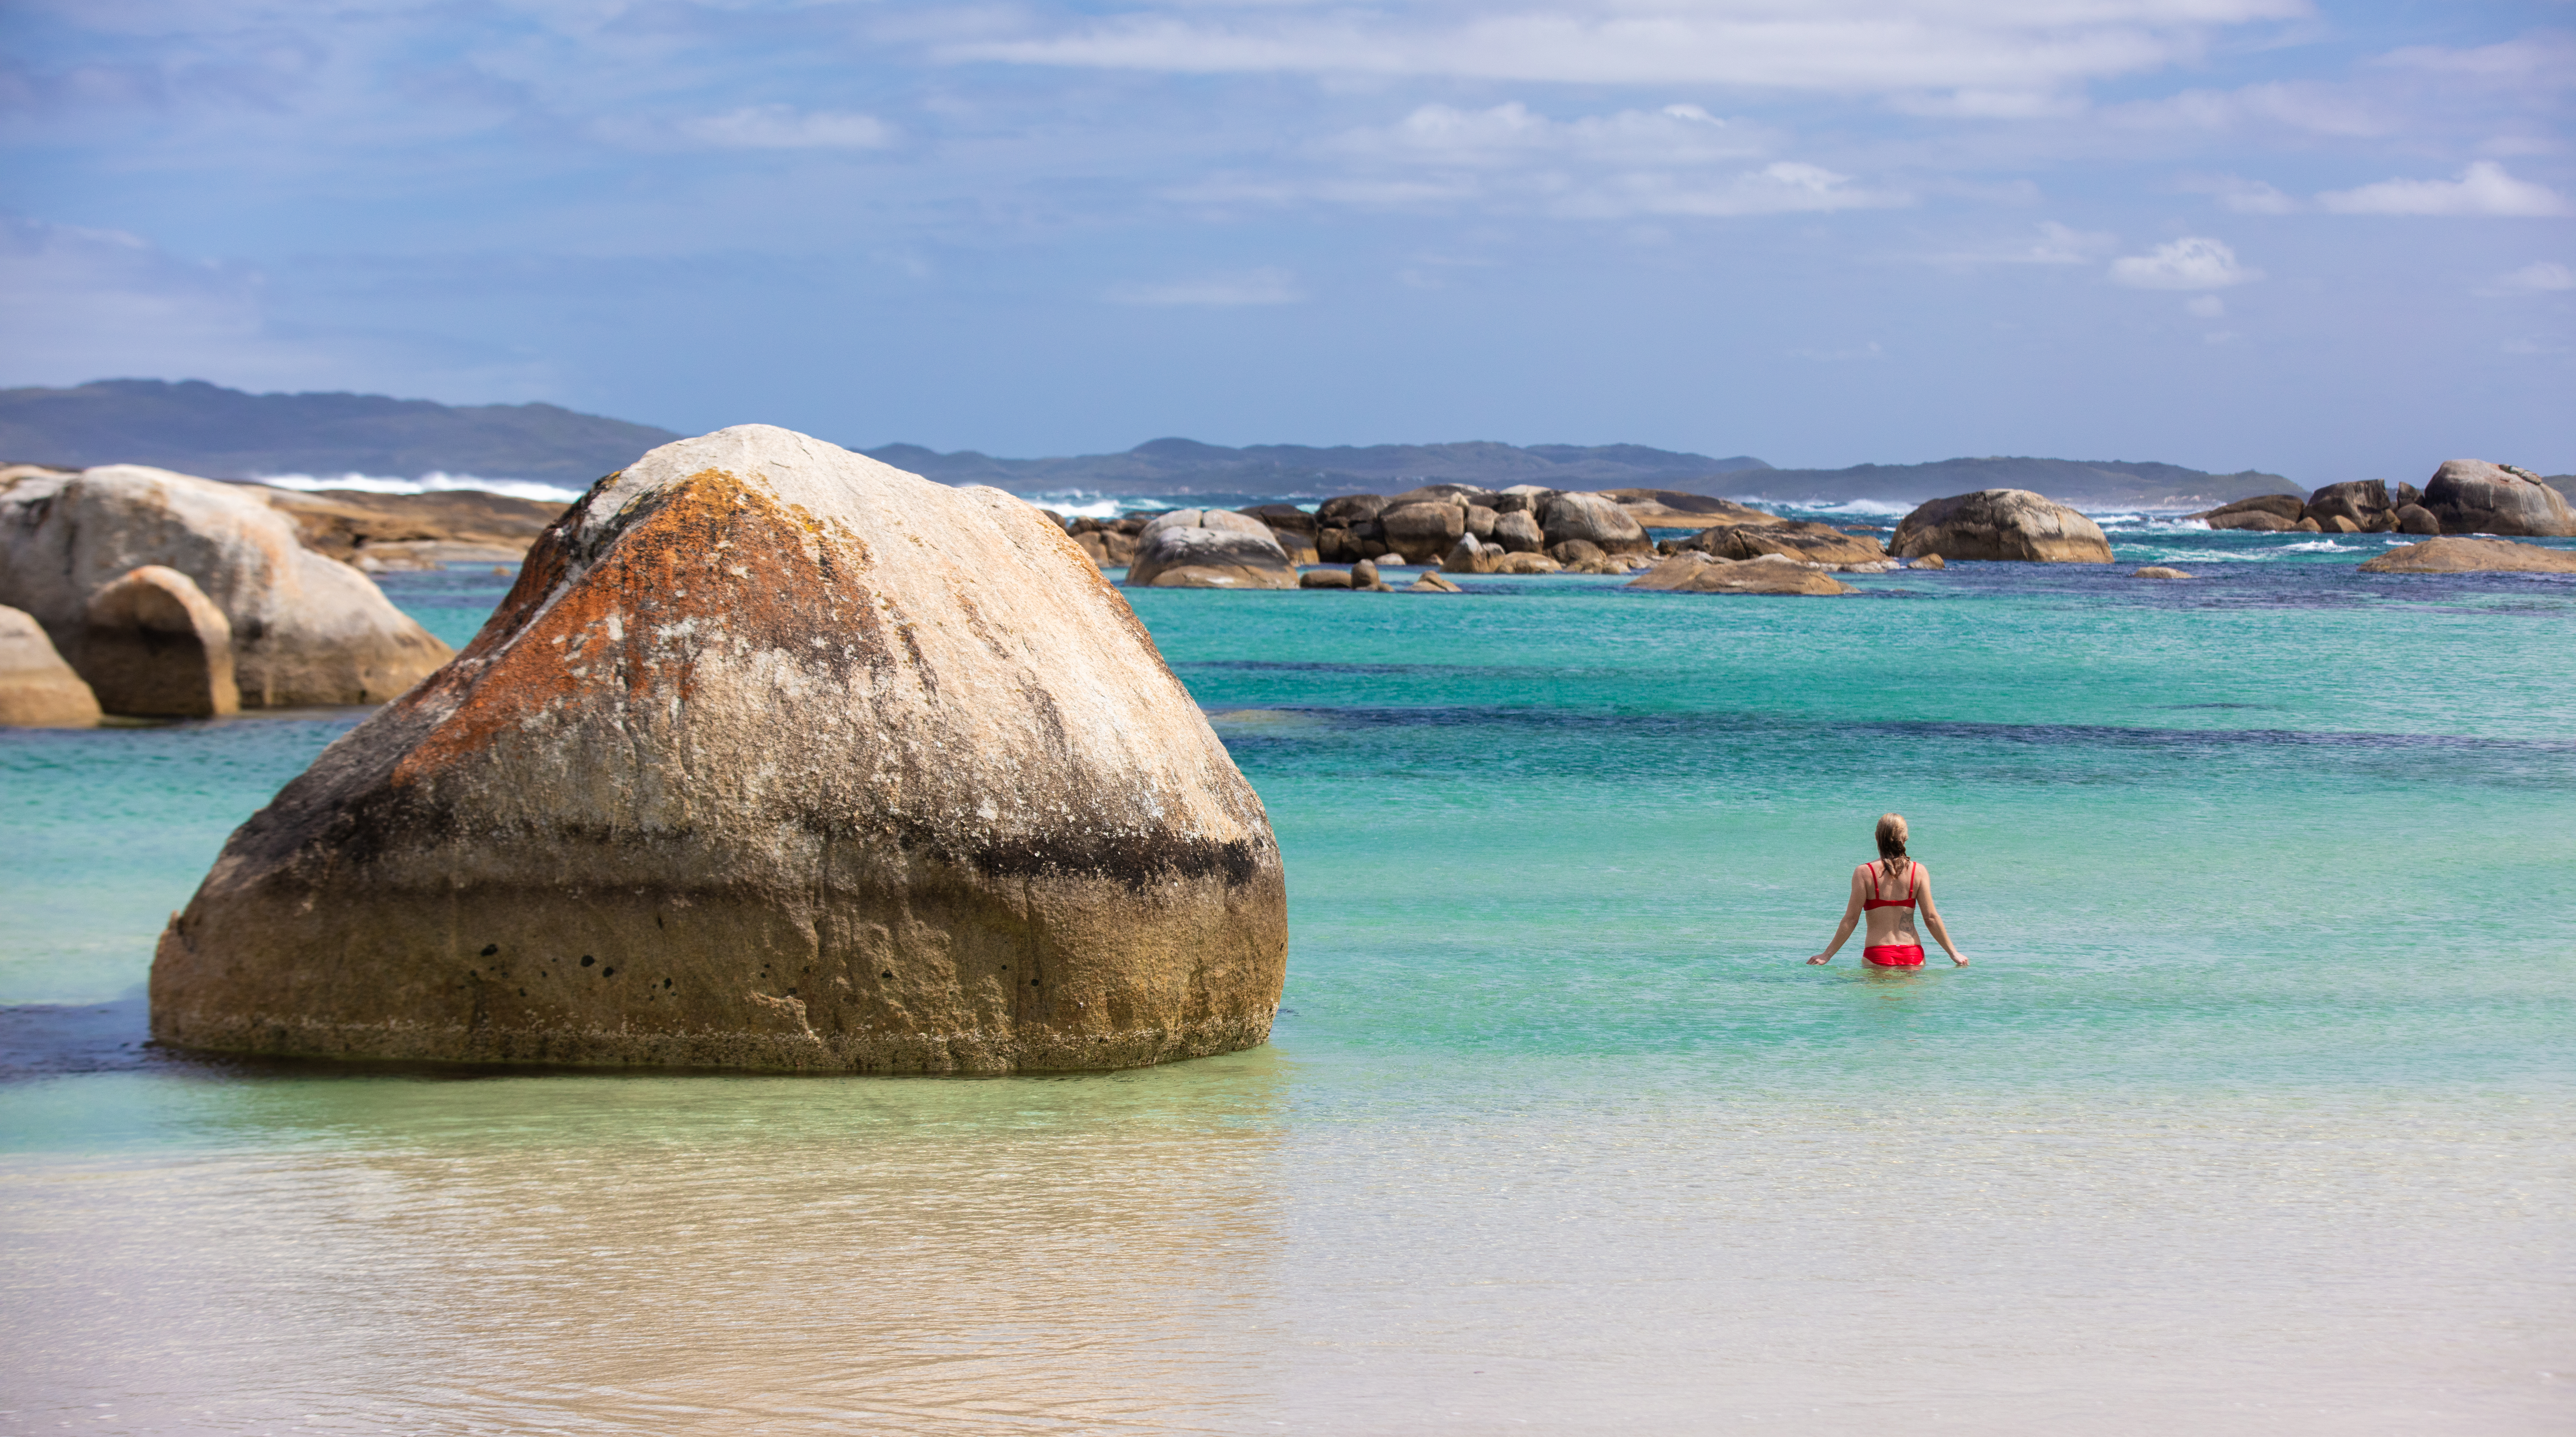 landscape image of girl in red bikini next to giant boulder in blue waters shows national parks in the south west edge are unique